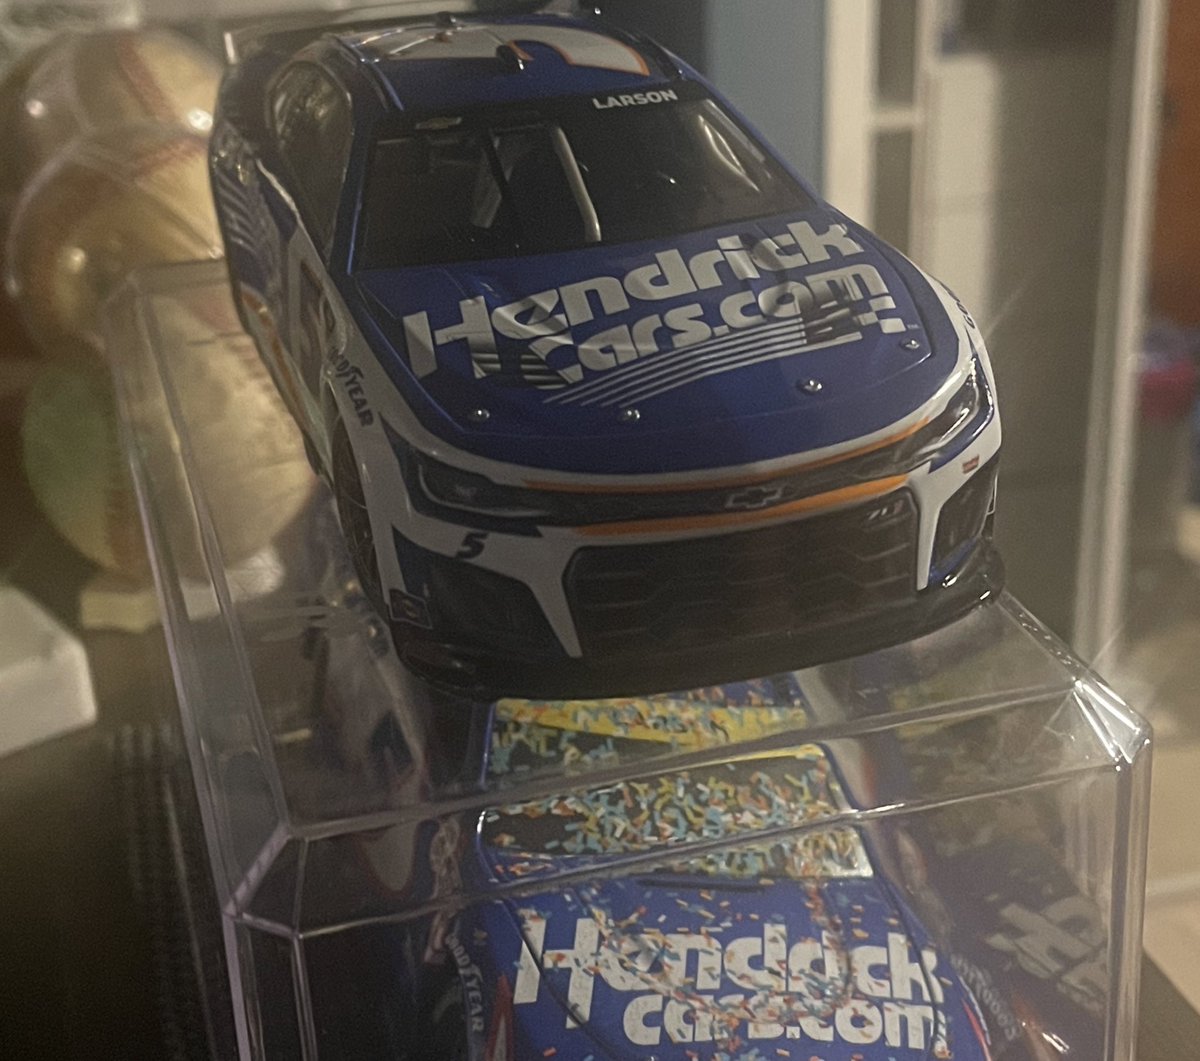 i guess this is a Justin Allgaier diecast now 😭😭